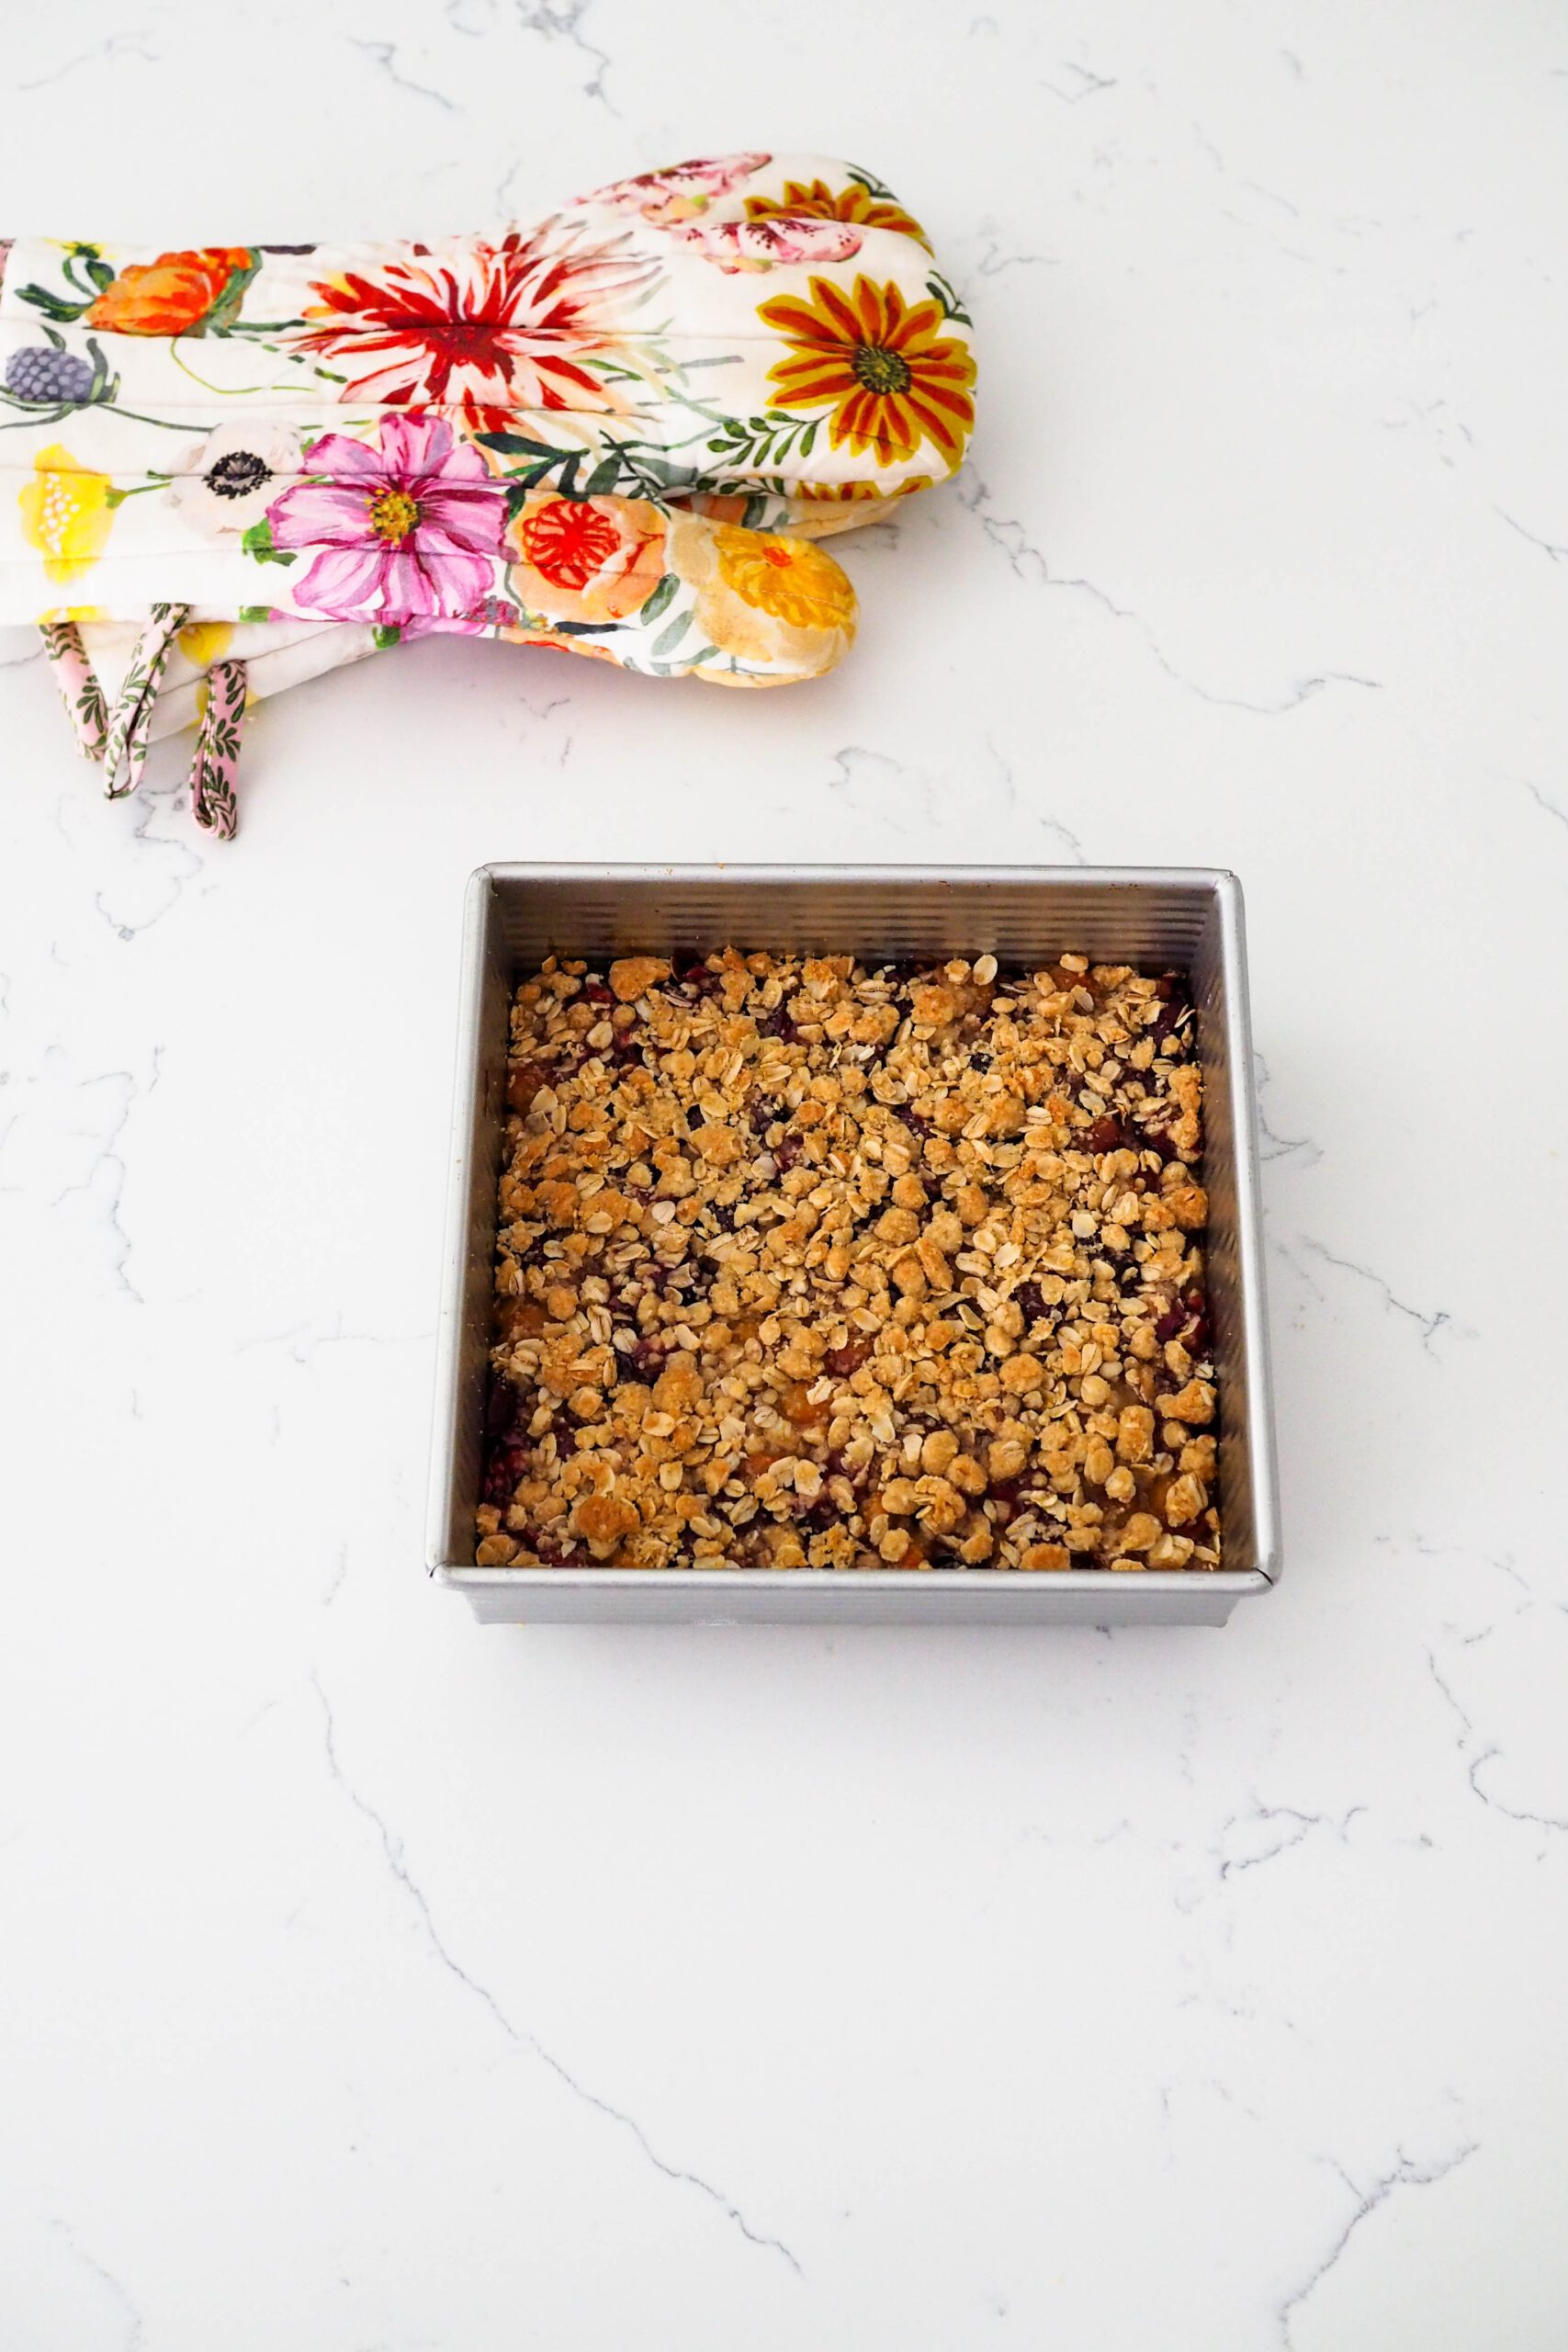 A fully-baked cherry crumble on a quartz counter.